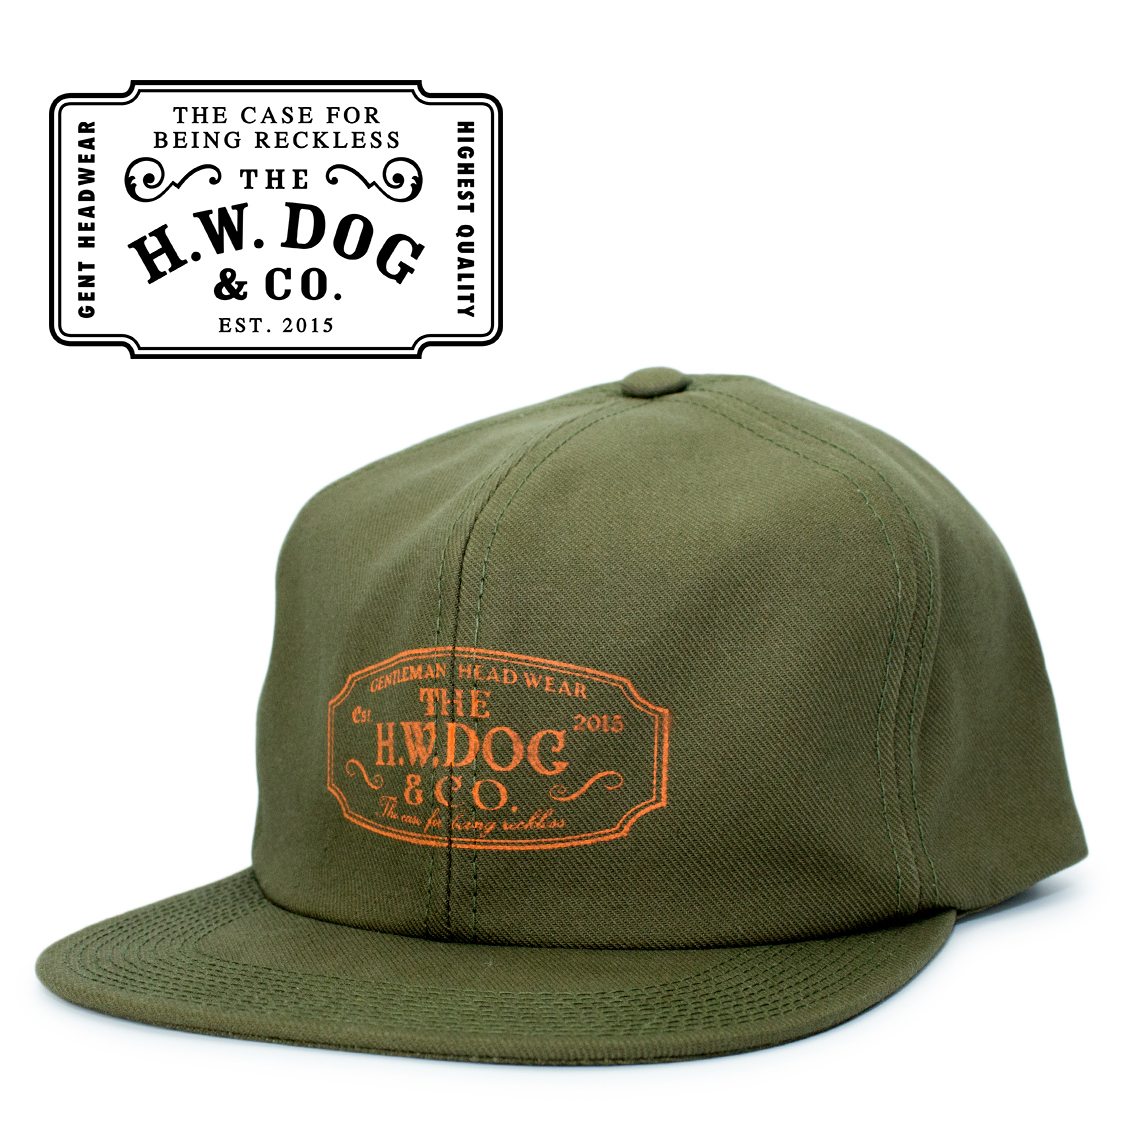 HARTLEY CLOTHING STORE BLOG: THE H.W.DOG&CO. ドッグアンドコー トラッカー キャップ